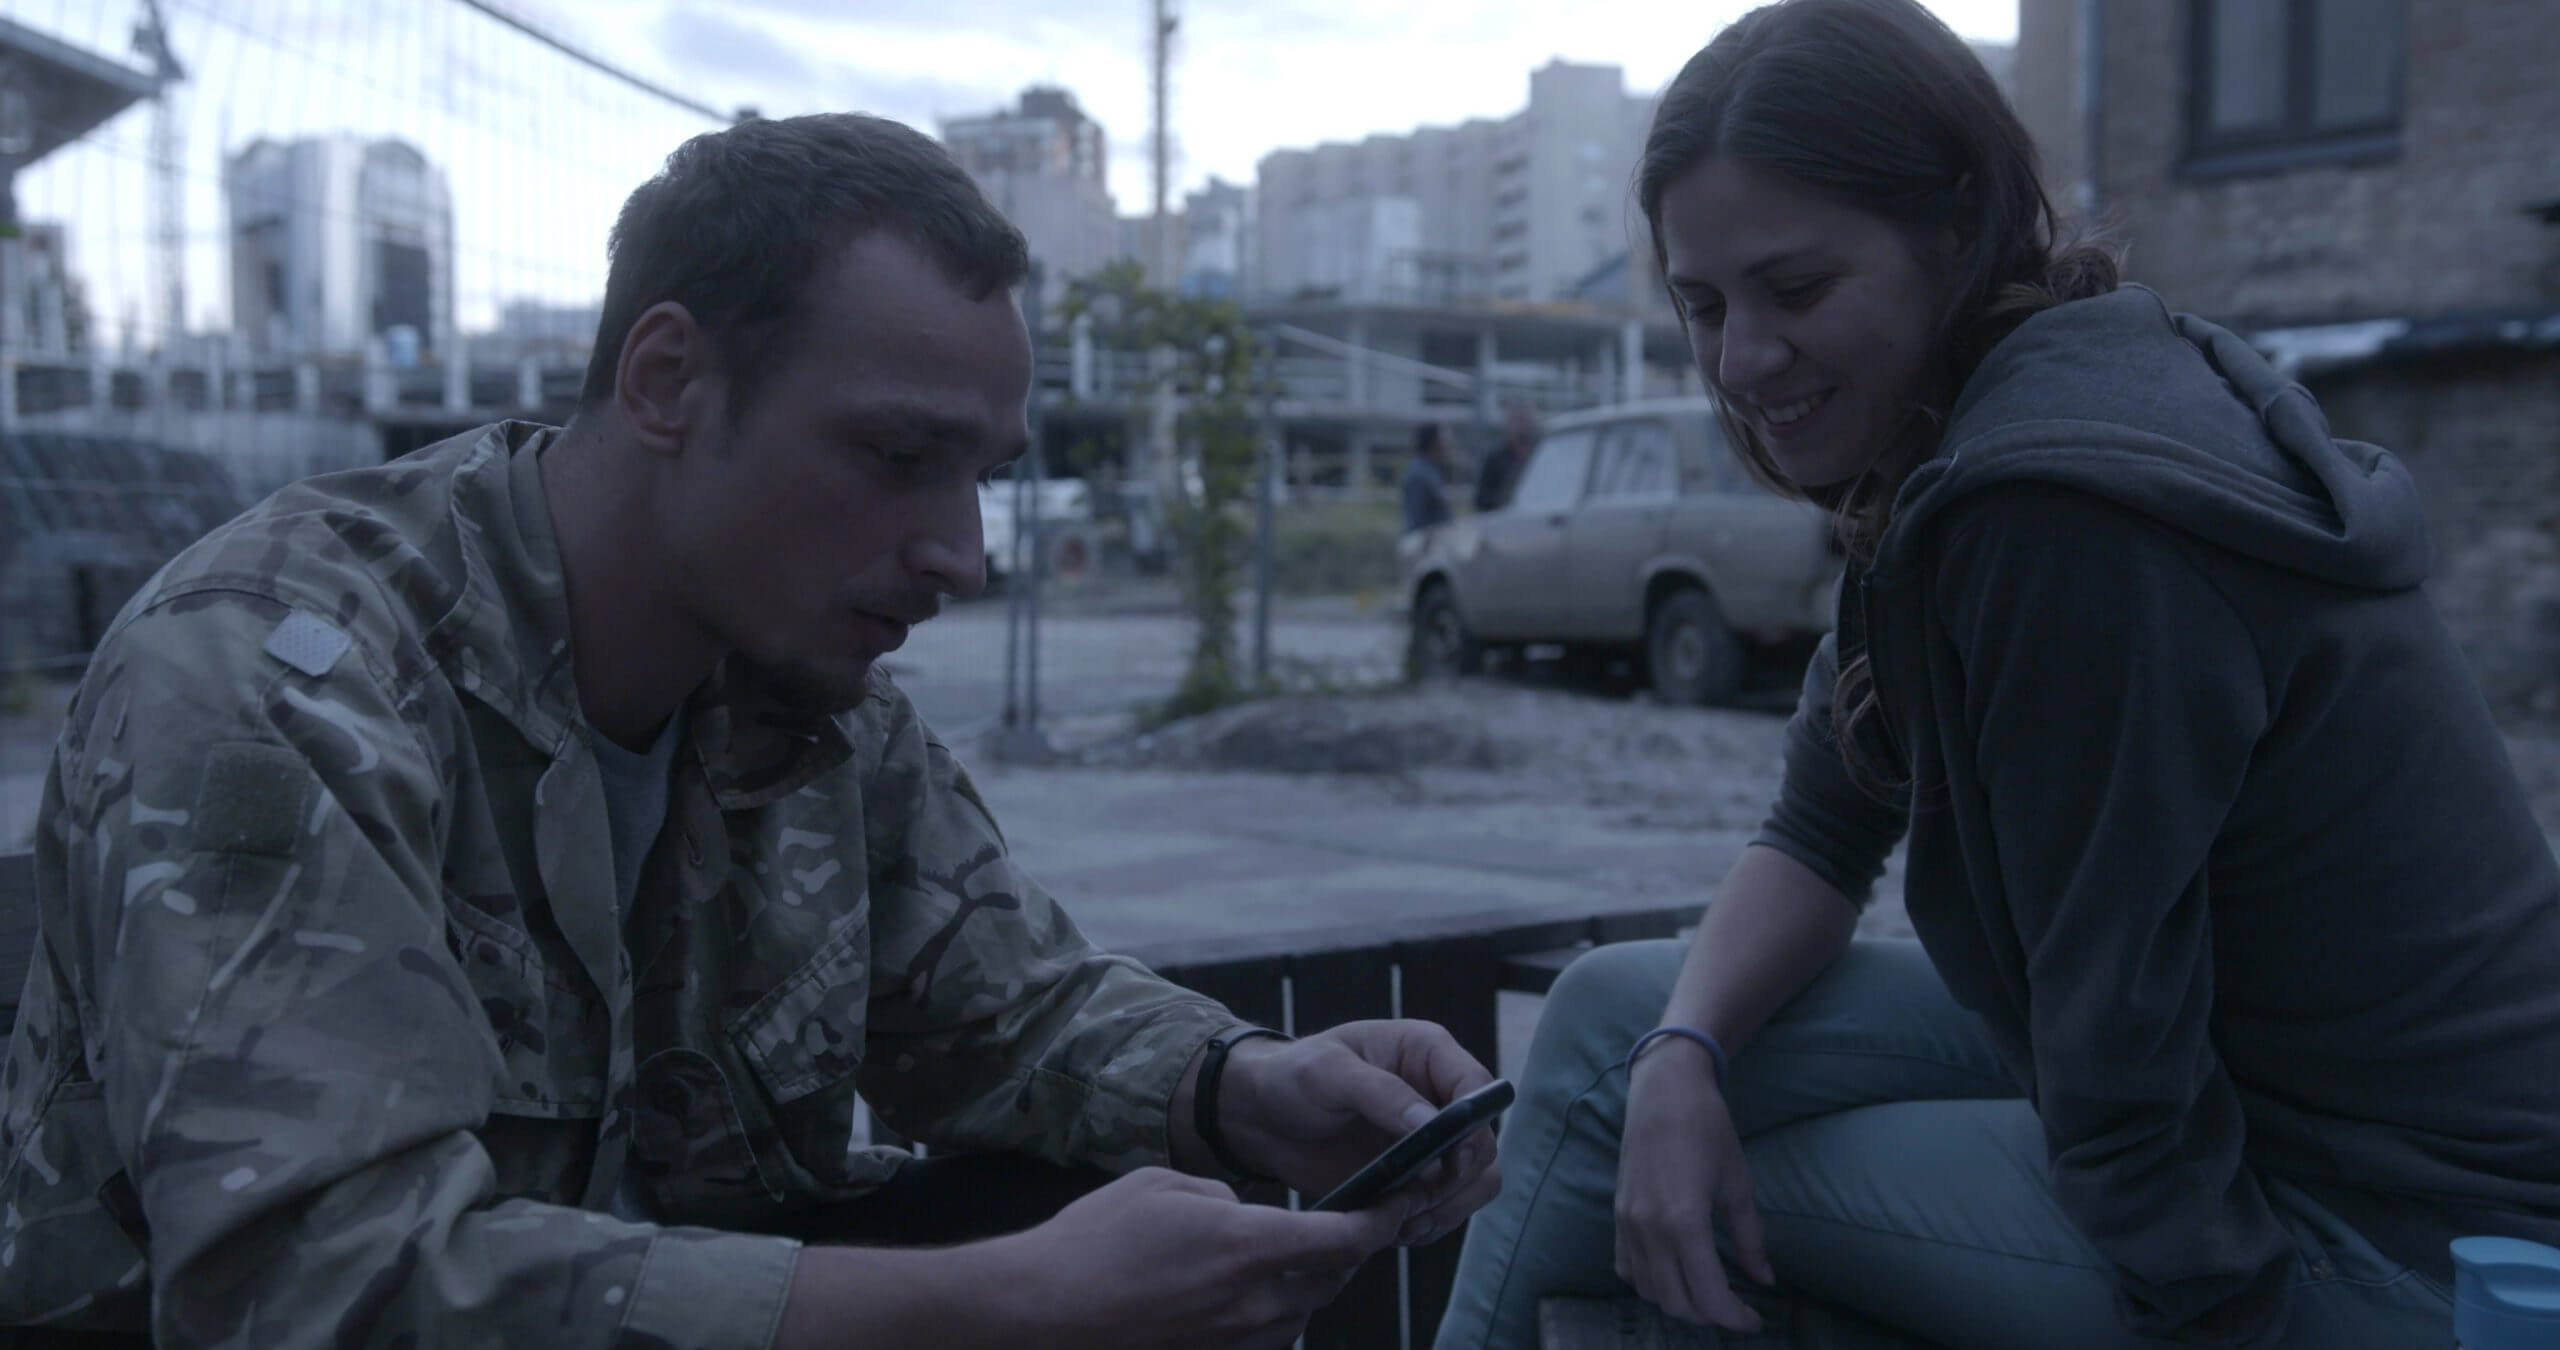 Still from The Hamlet Syndrome. A man and a woman look at a cellphone. Both are sitting. The man wears a camo jacket, the woman is dressed in jeans and a hoodie. The background is a cityscape.